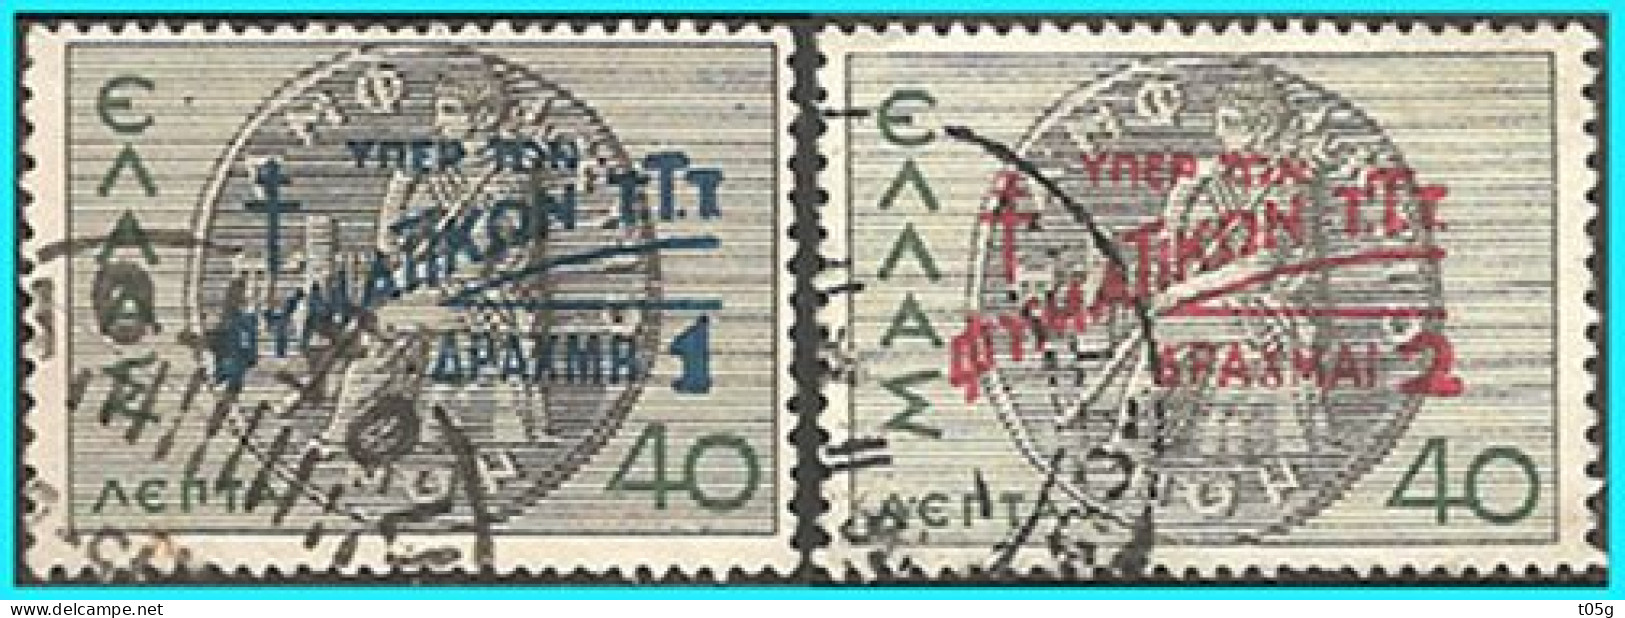 GREECE - GRECE - HELLAS 1945: 1drx/40l - 2drx/40L charity Stamps. used - Charity Issues